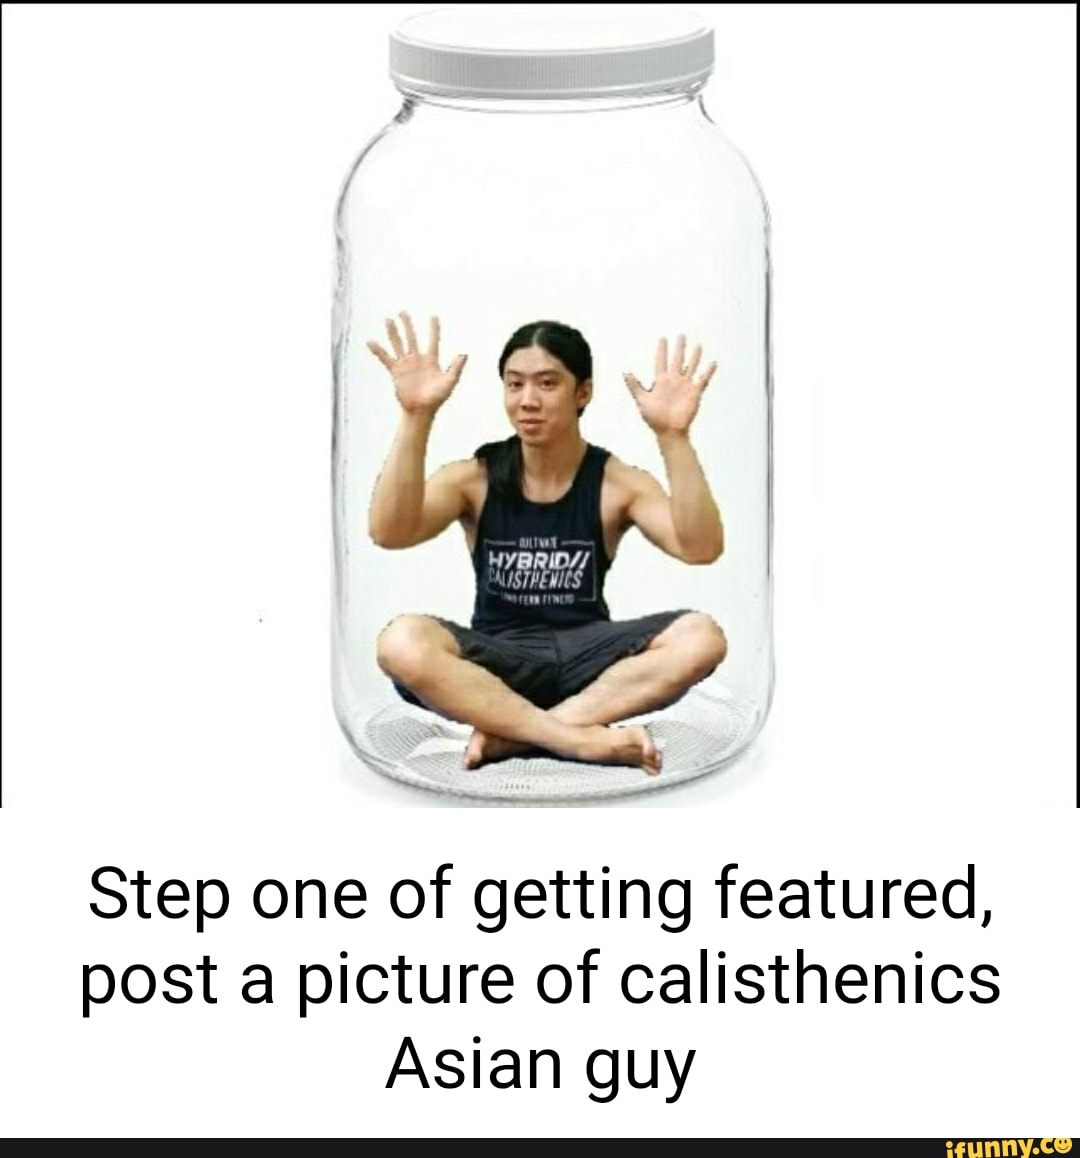 Step one of getting featured, post a picture of calisthenics Asian